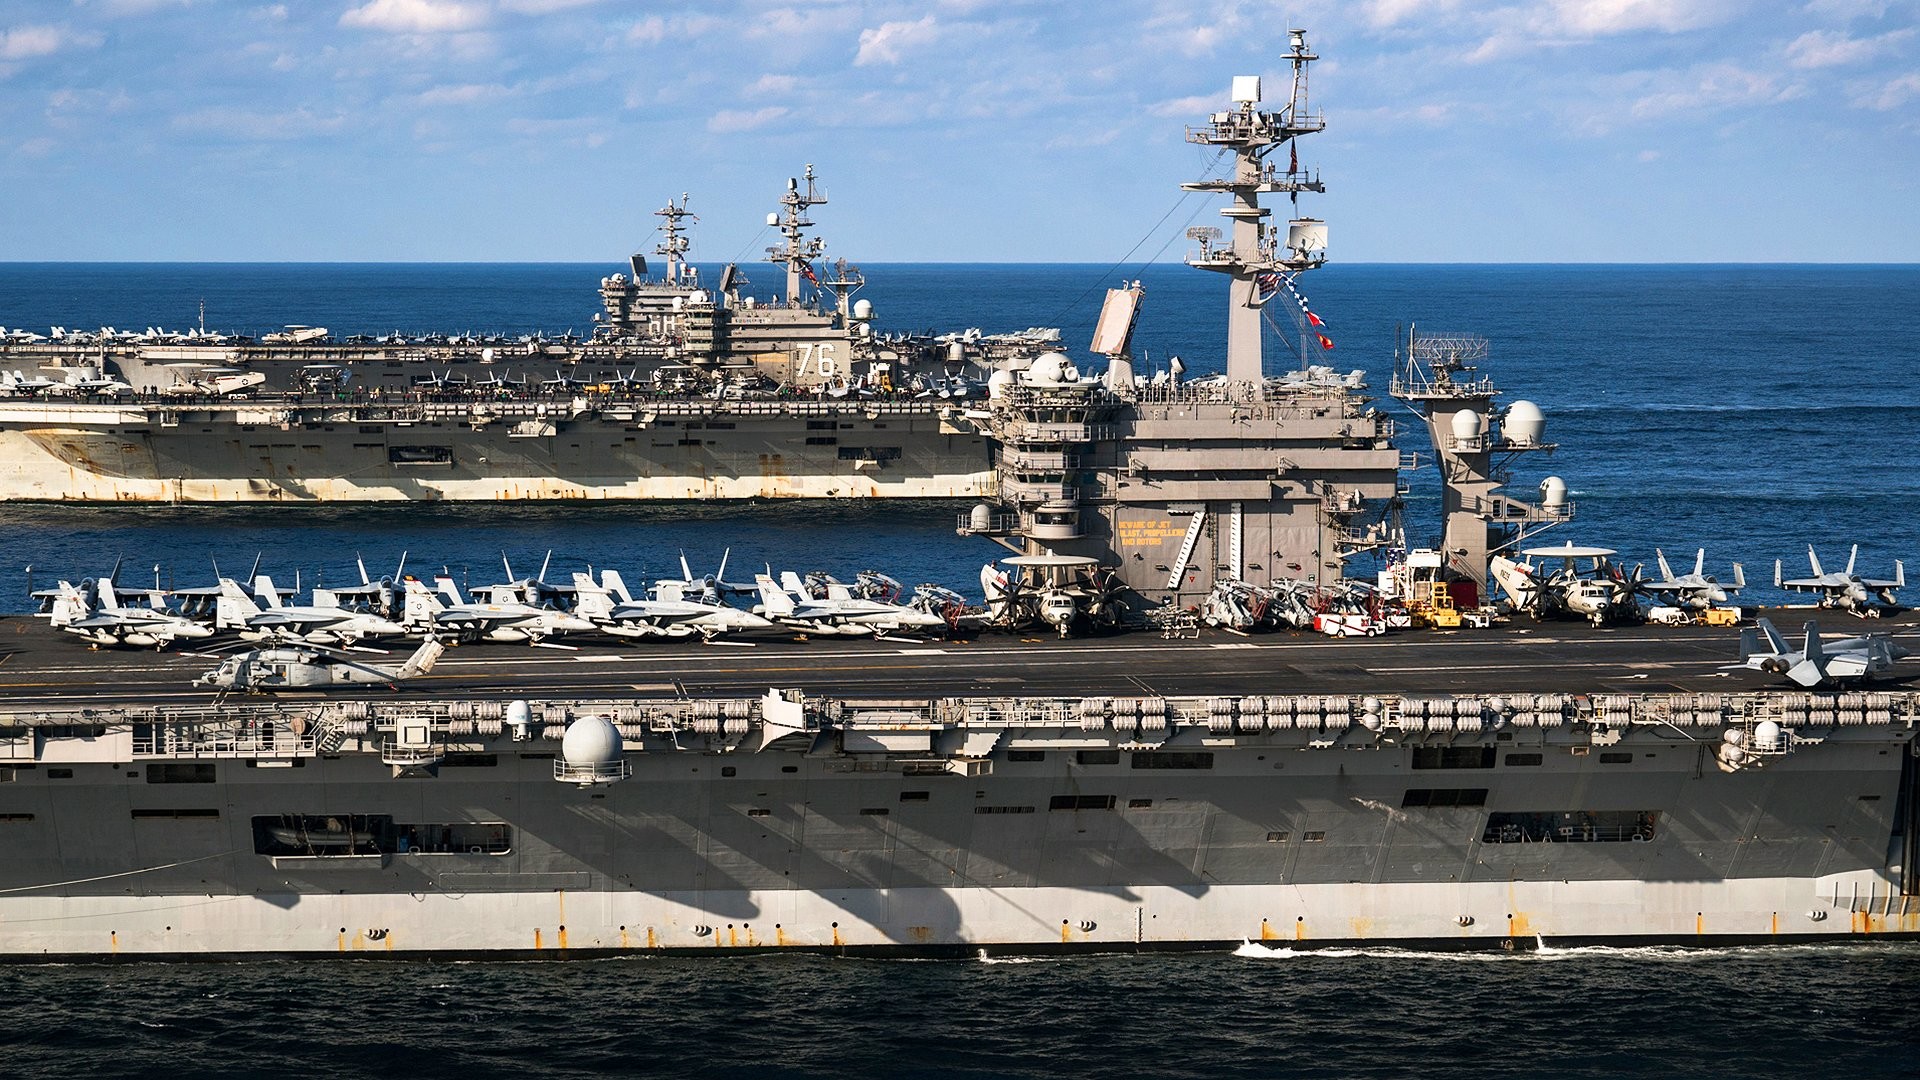 1920x1080 These Are The Images Of Three U.S. Supercarriers In Formation You've Been  Waiting For - The Drive